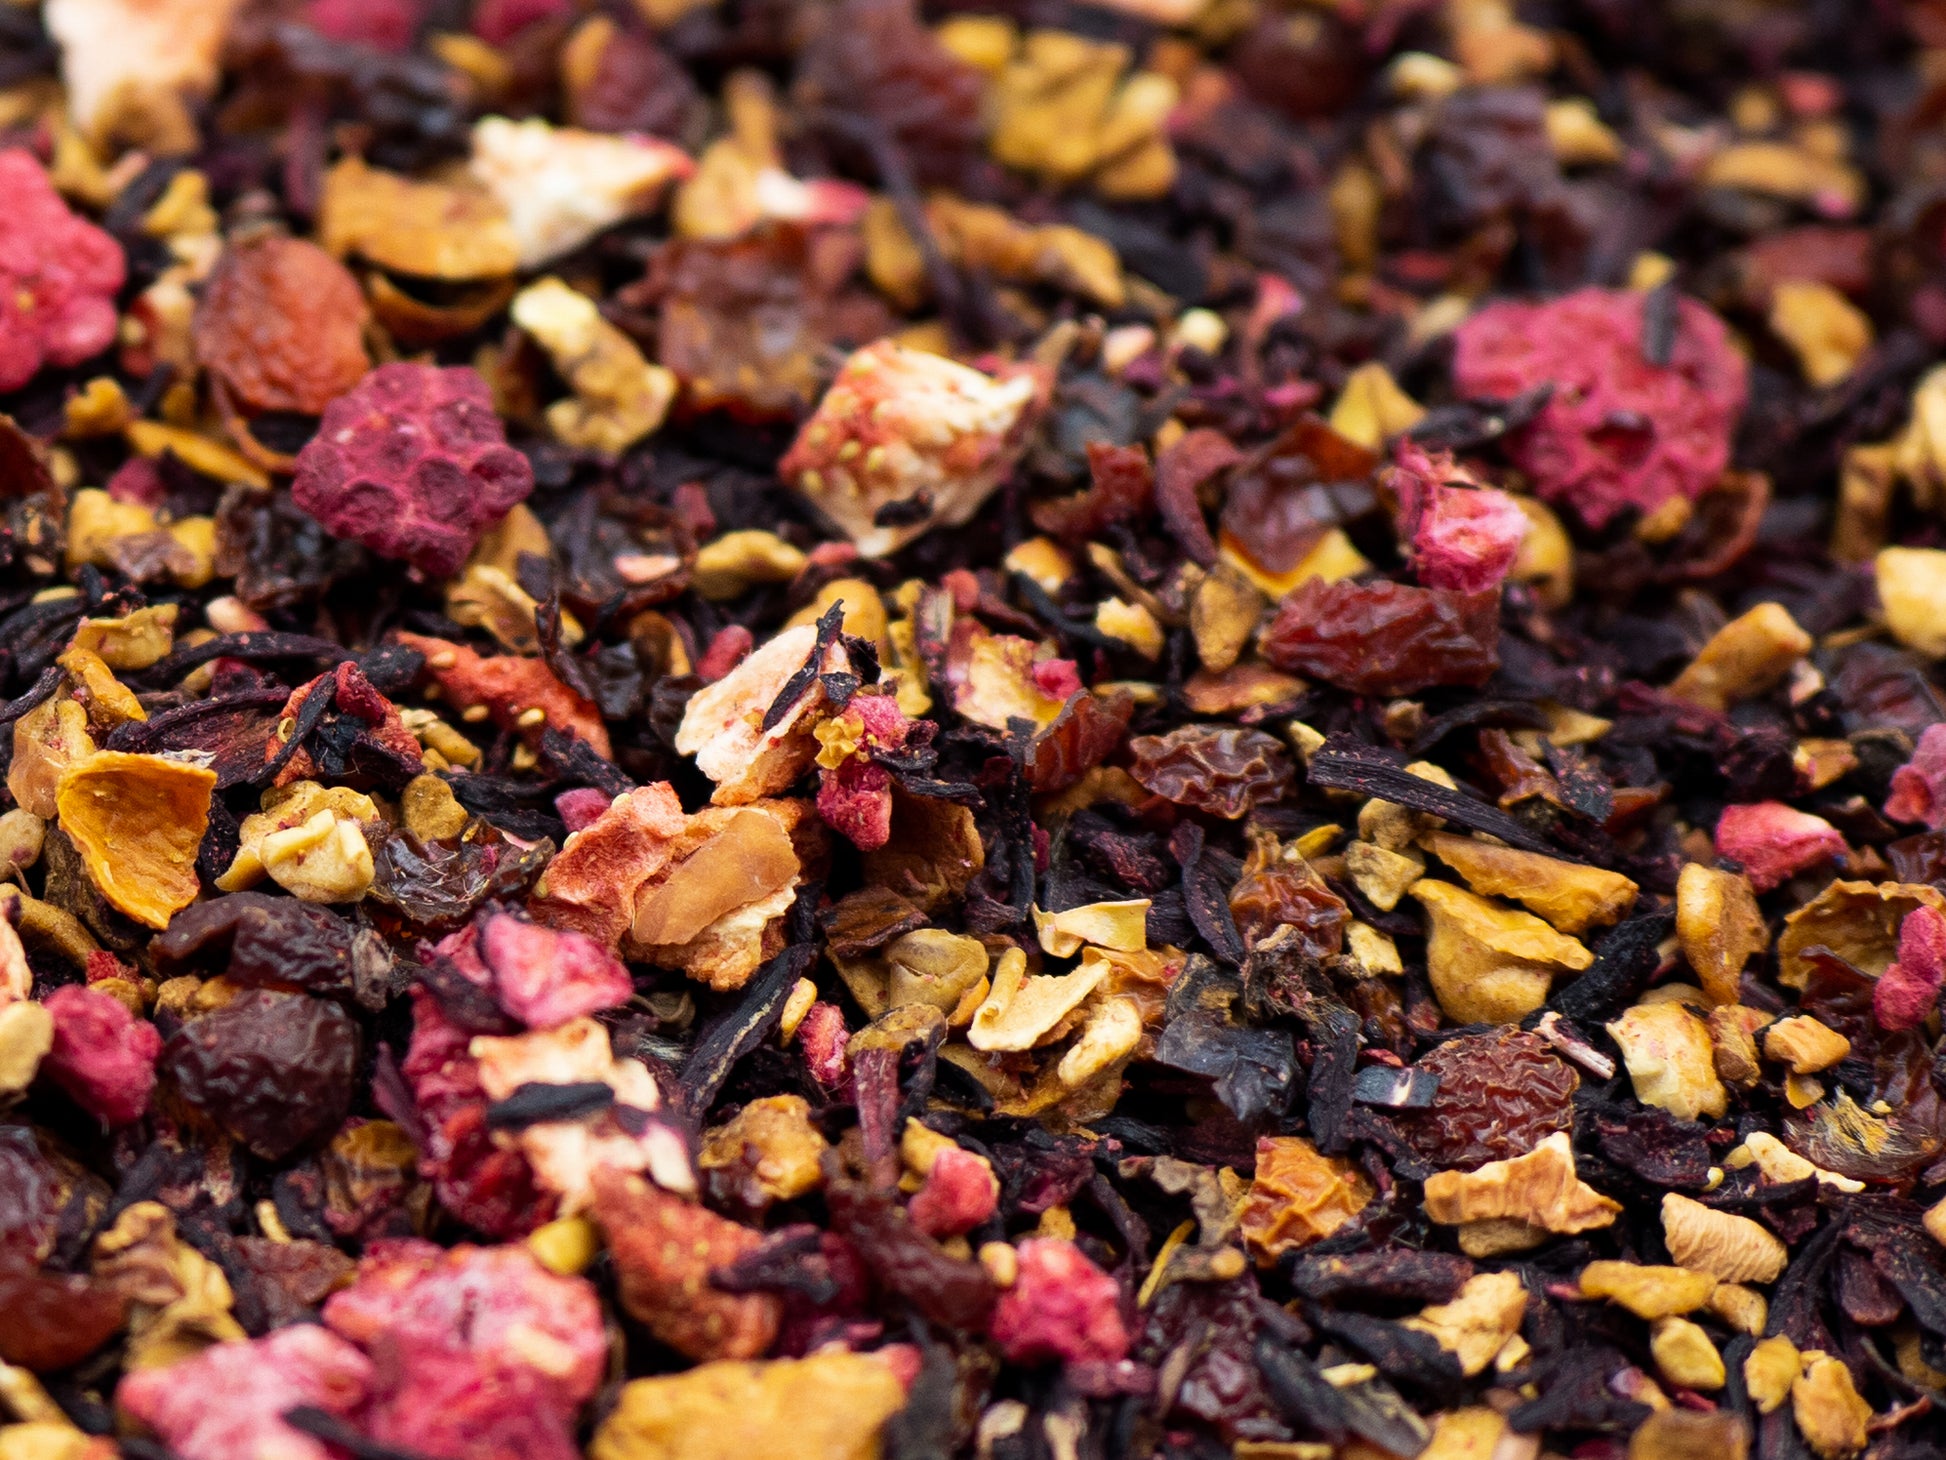 Red Berry loose fruit tea from TEA23